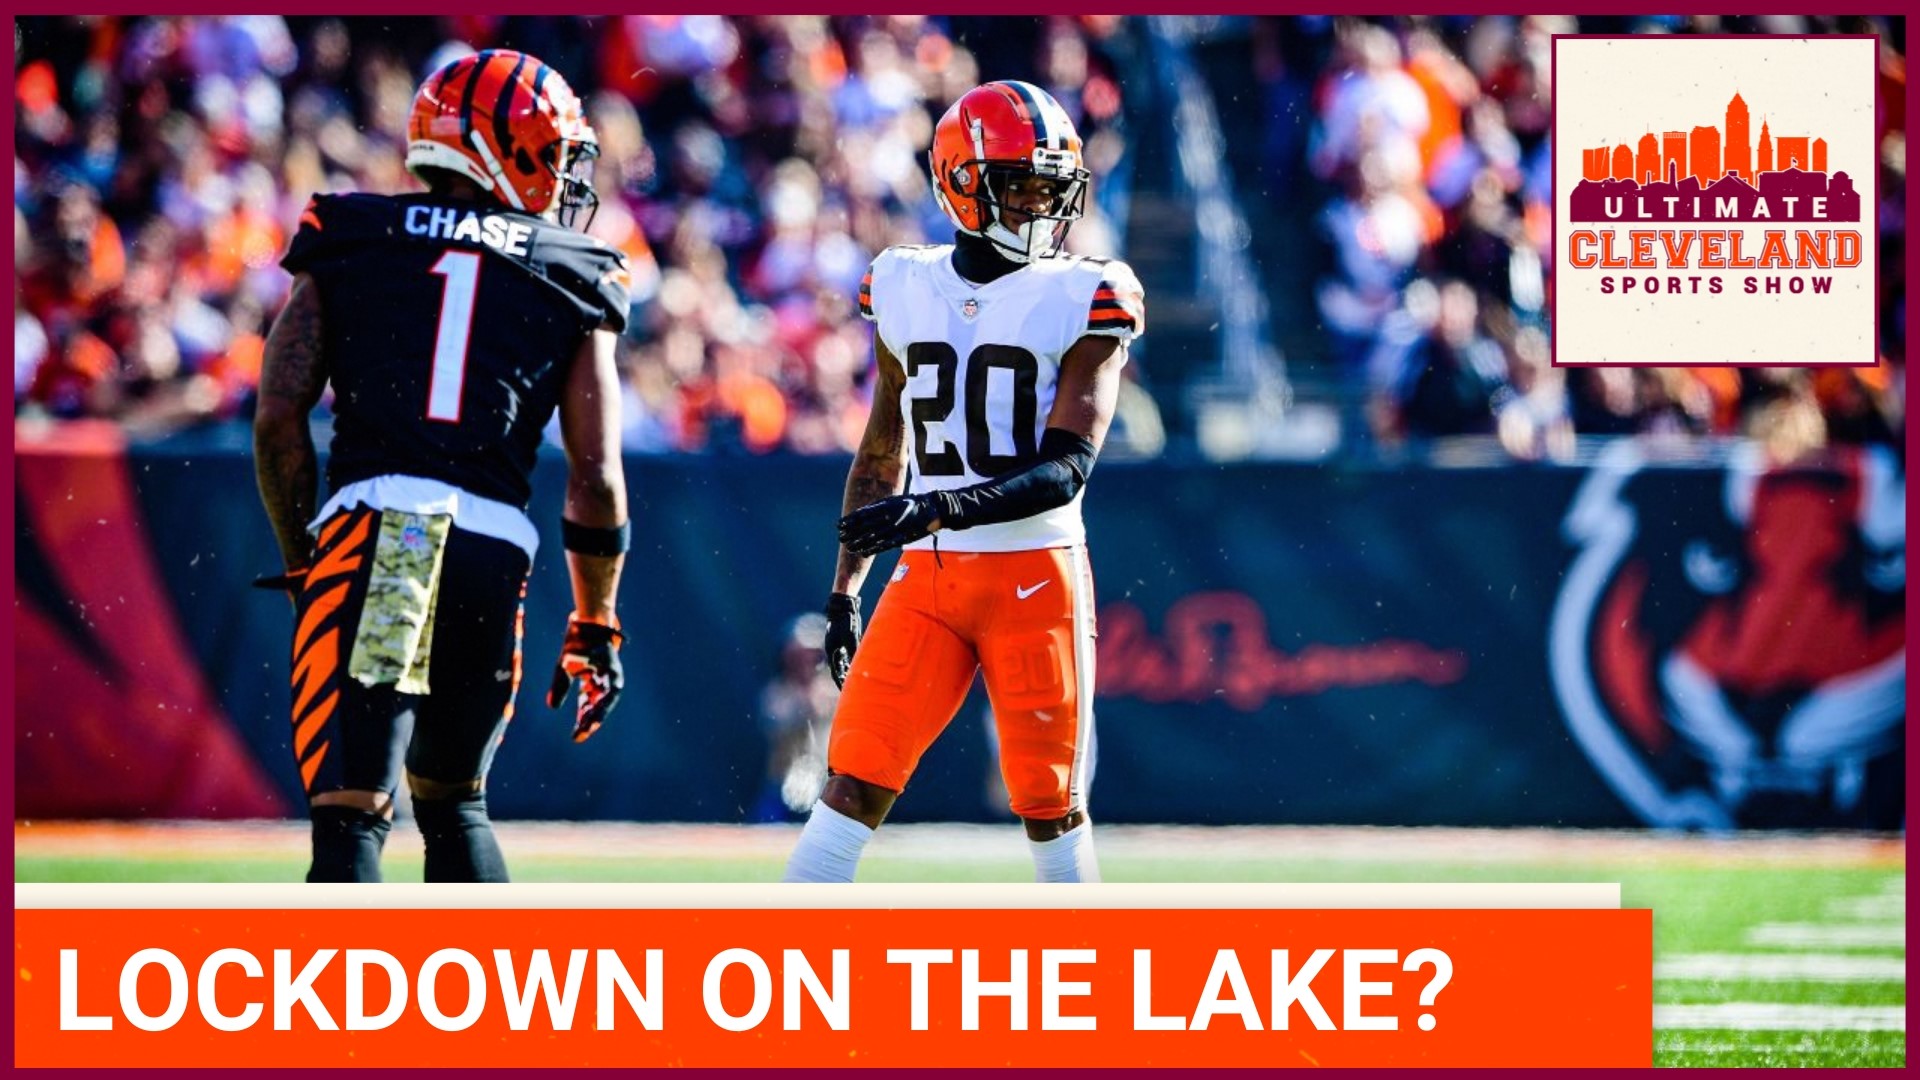 The Bengals offense is HIGH POWERED but can the Cleveland Browns put together another solid performance on defense to slow them down?